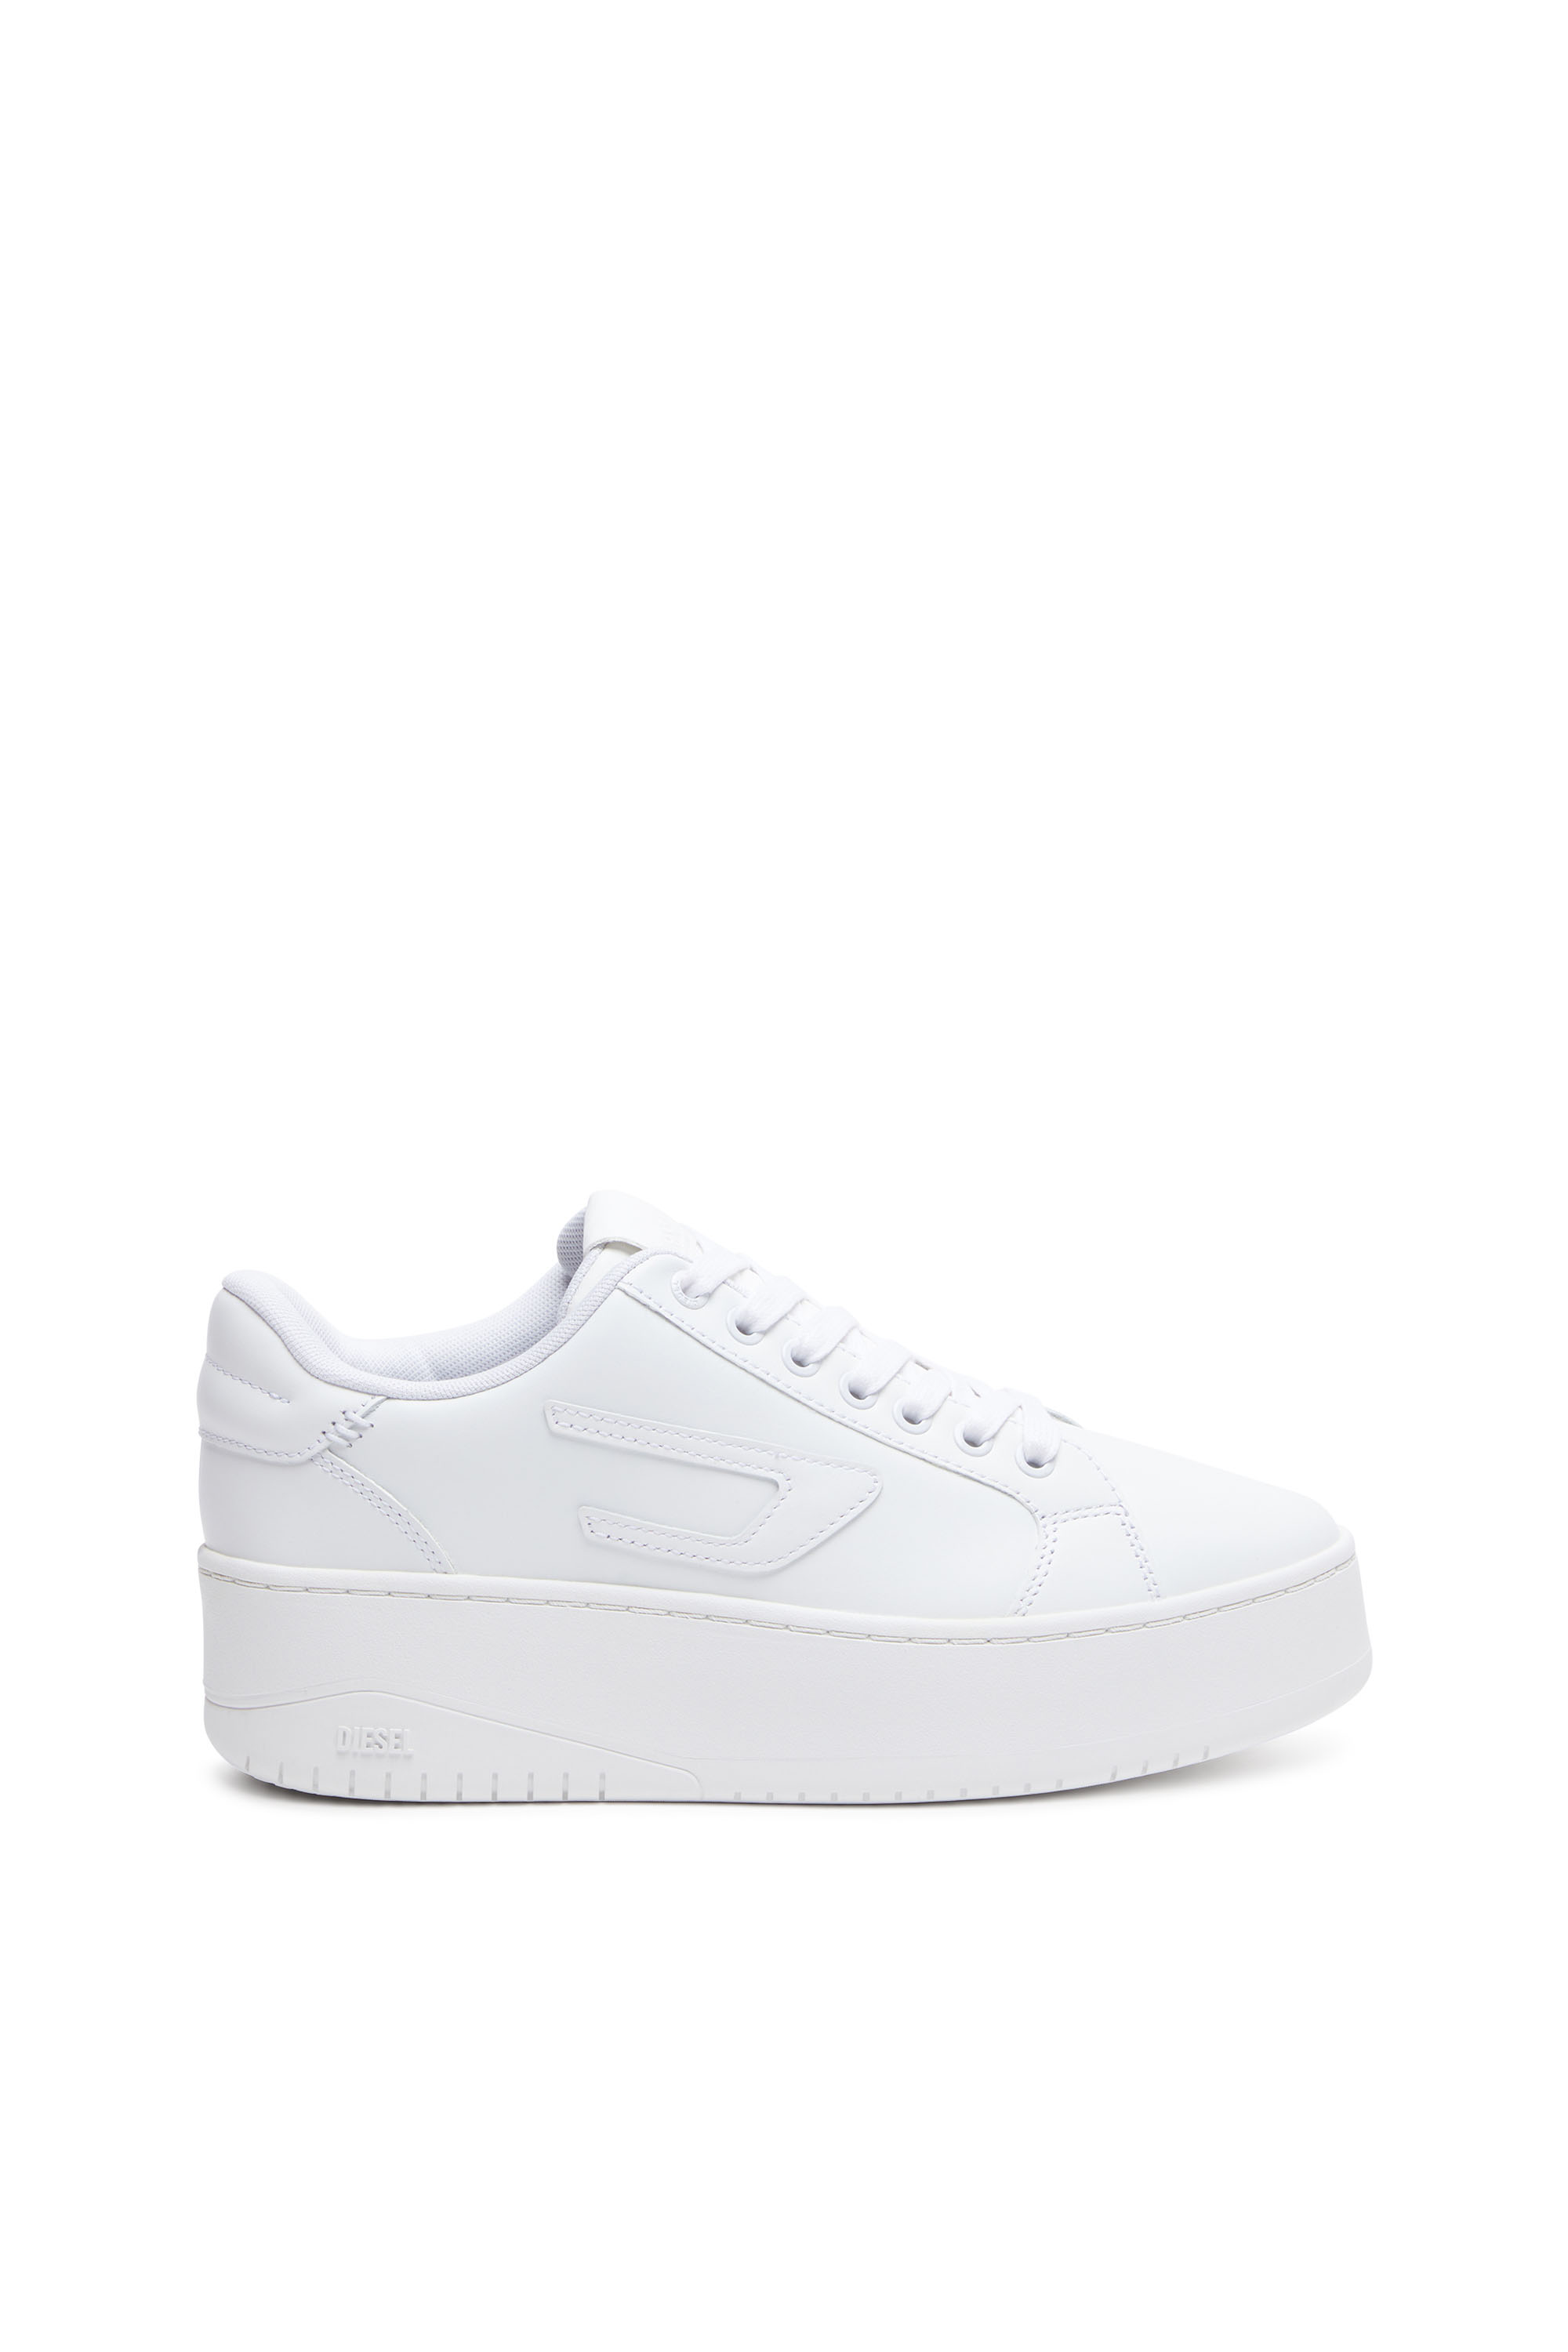 Diesel - S-ATHENE BOLD X, Female S-Athene Bold-Flatform sneakers in leather in White - Image 1